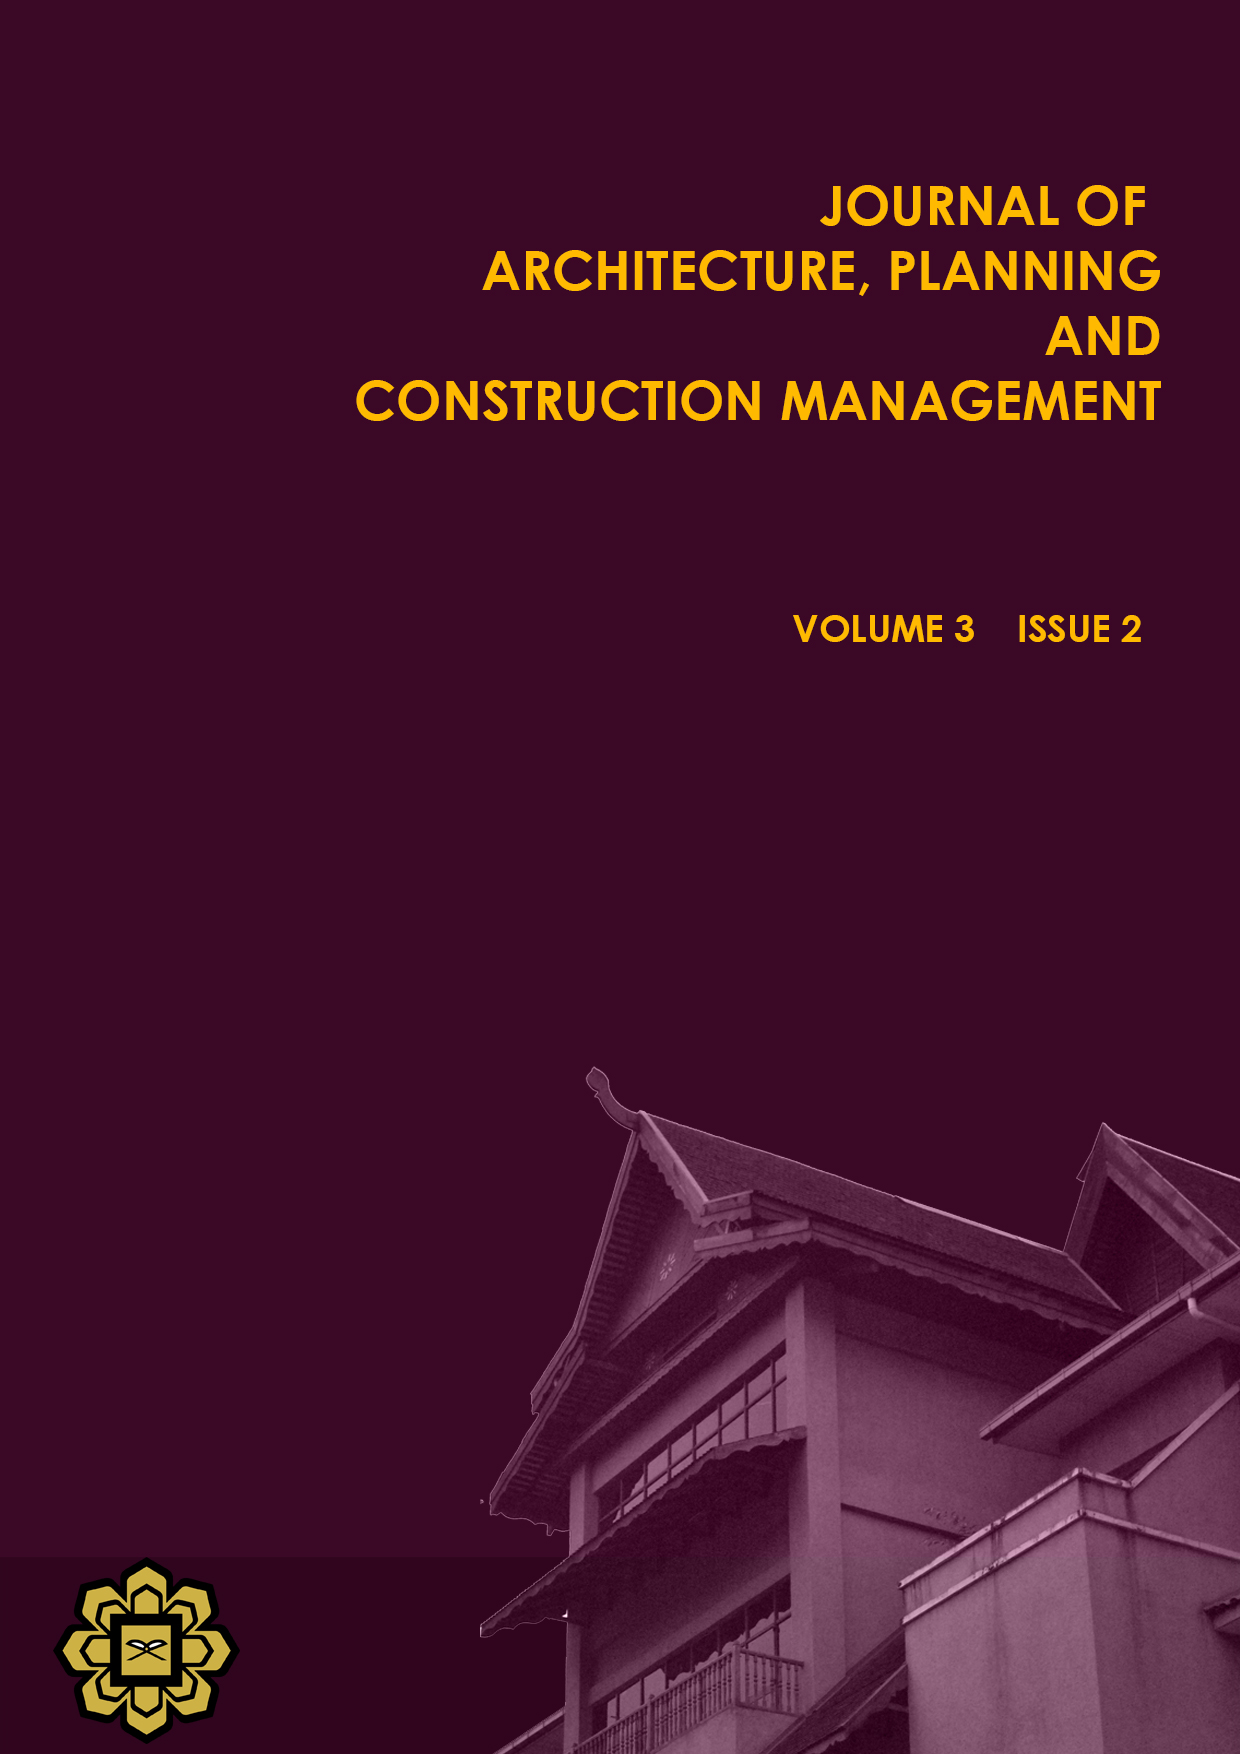 					View Vol. 3 No. 2 (2013): Journal of Architecture, Planning and Construction Management (JAPCM) 
				